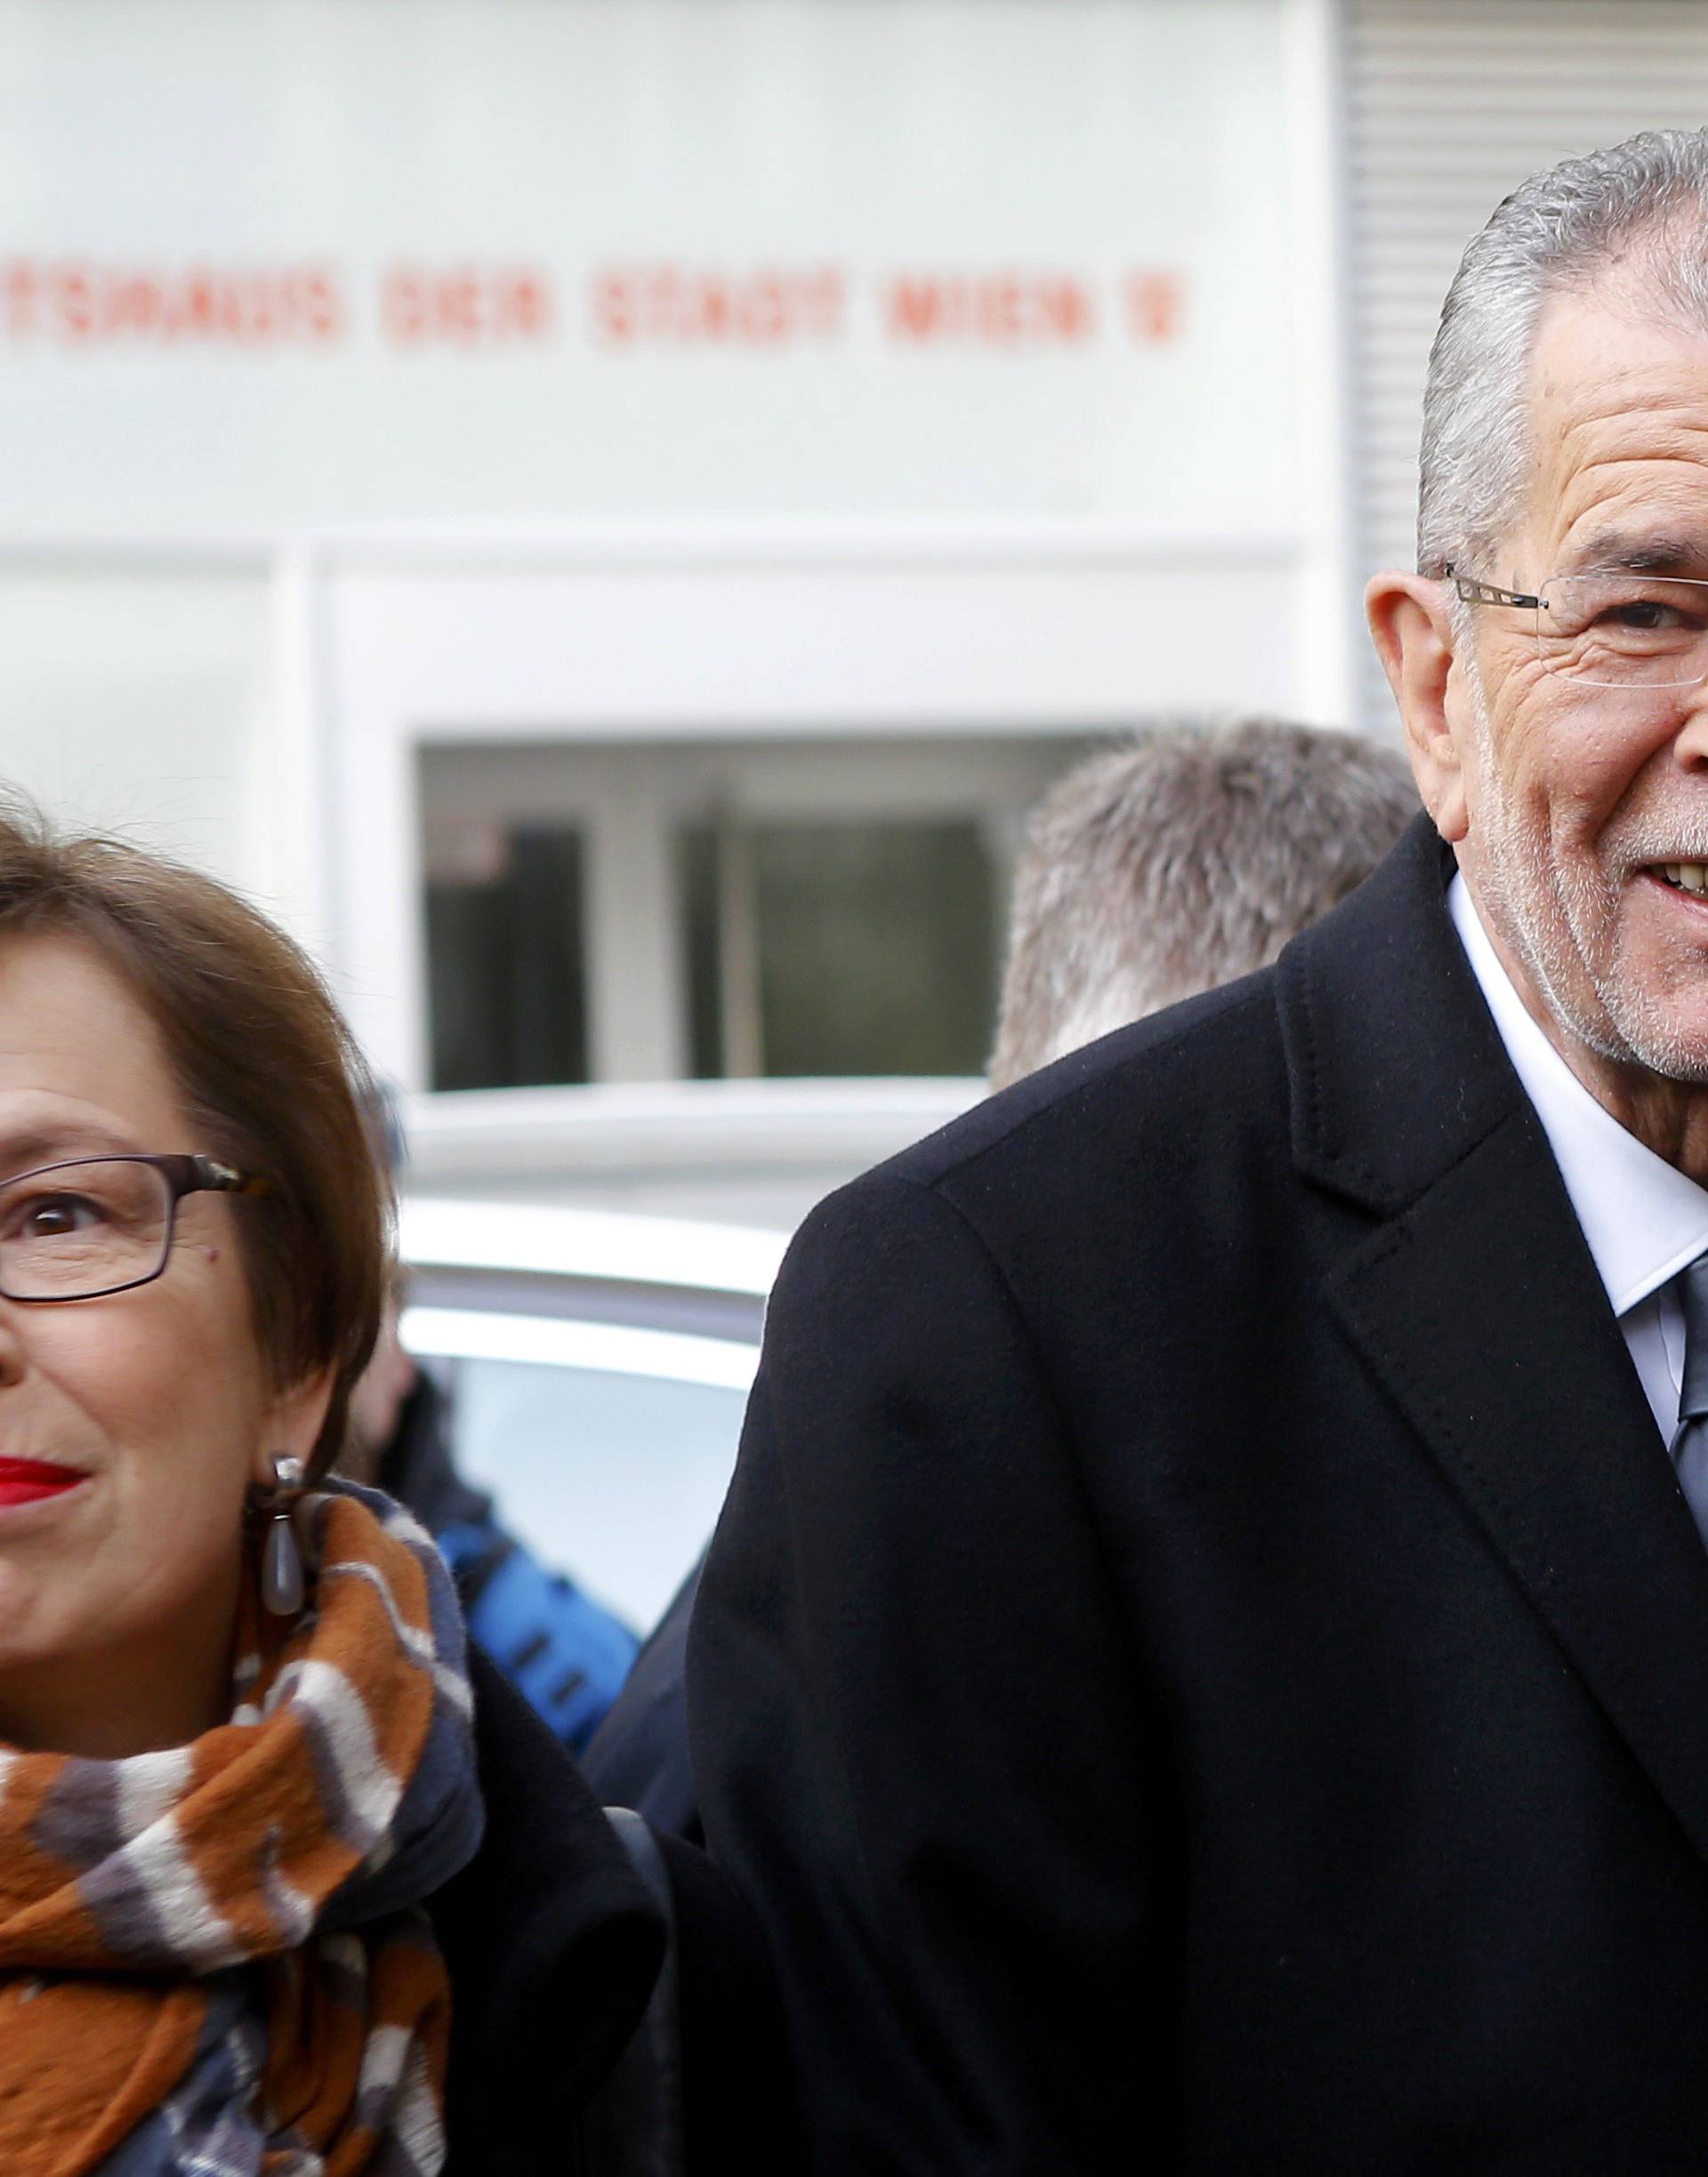 Austrian presidential candidate Van der Bellen, who is supported by the Greens, and his wife Schmidauer arrive in front of a polling station to cast their vote in Vienna